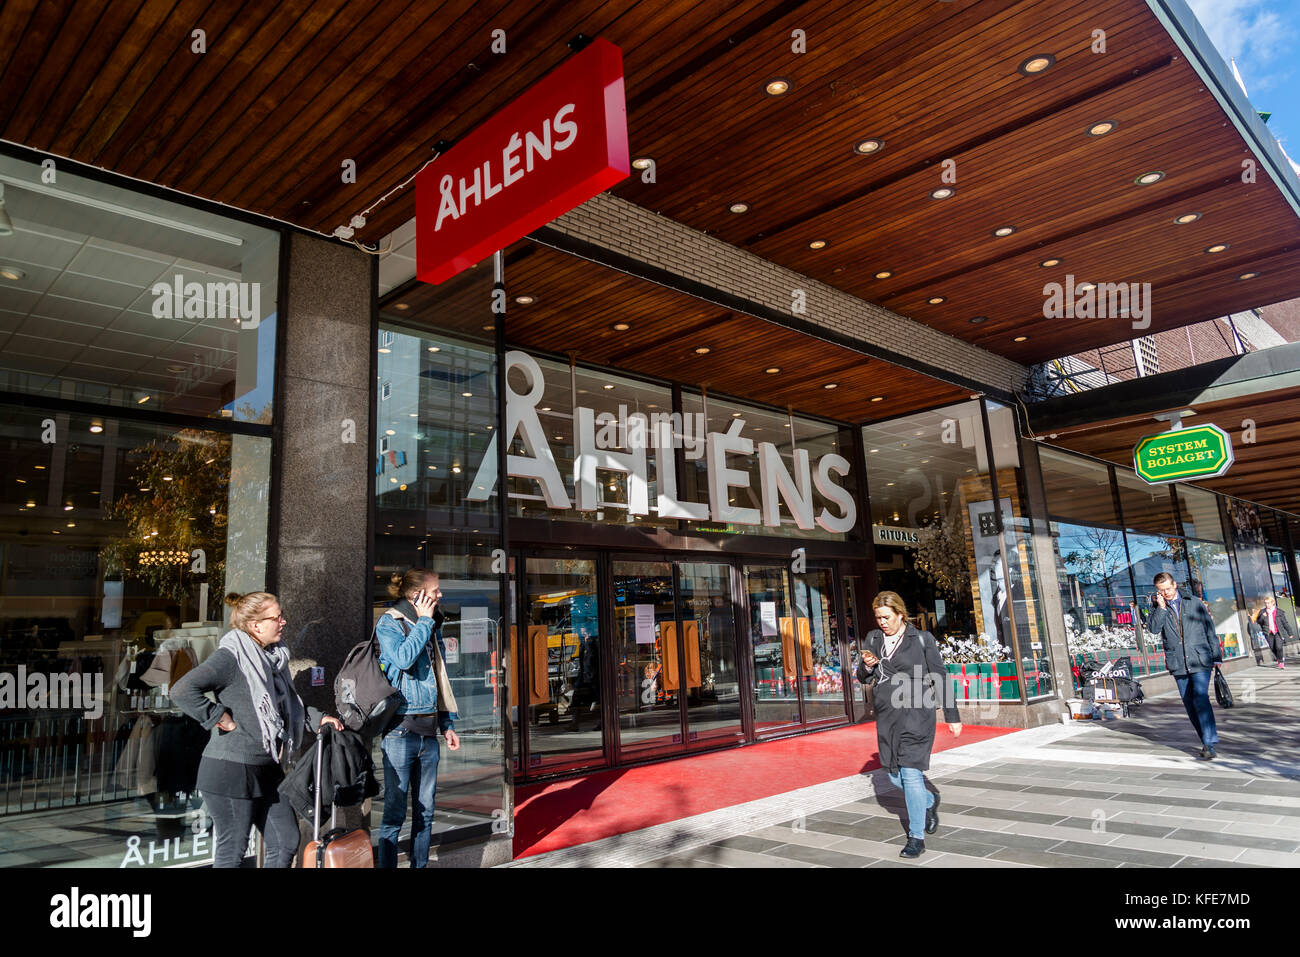 Ahlens City, a department store, Stockholm, Sweden Stock Photo ...